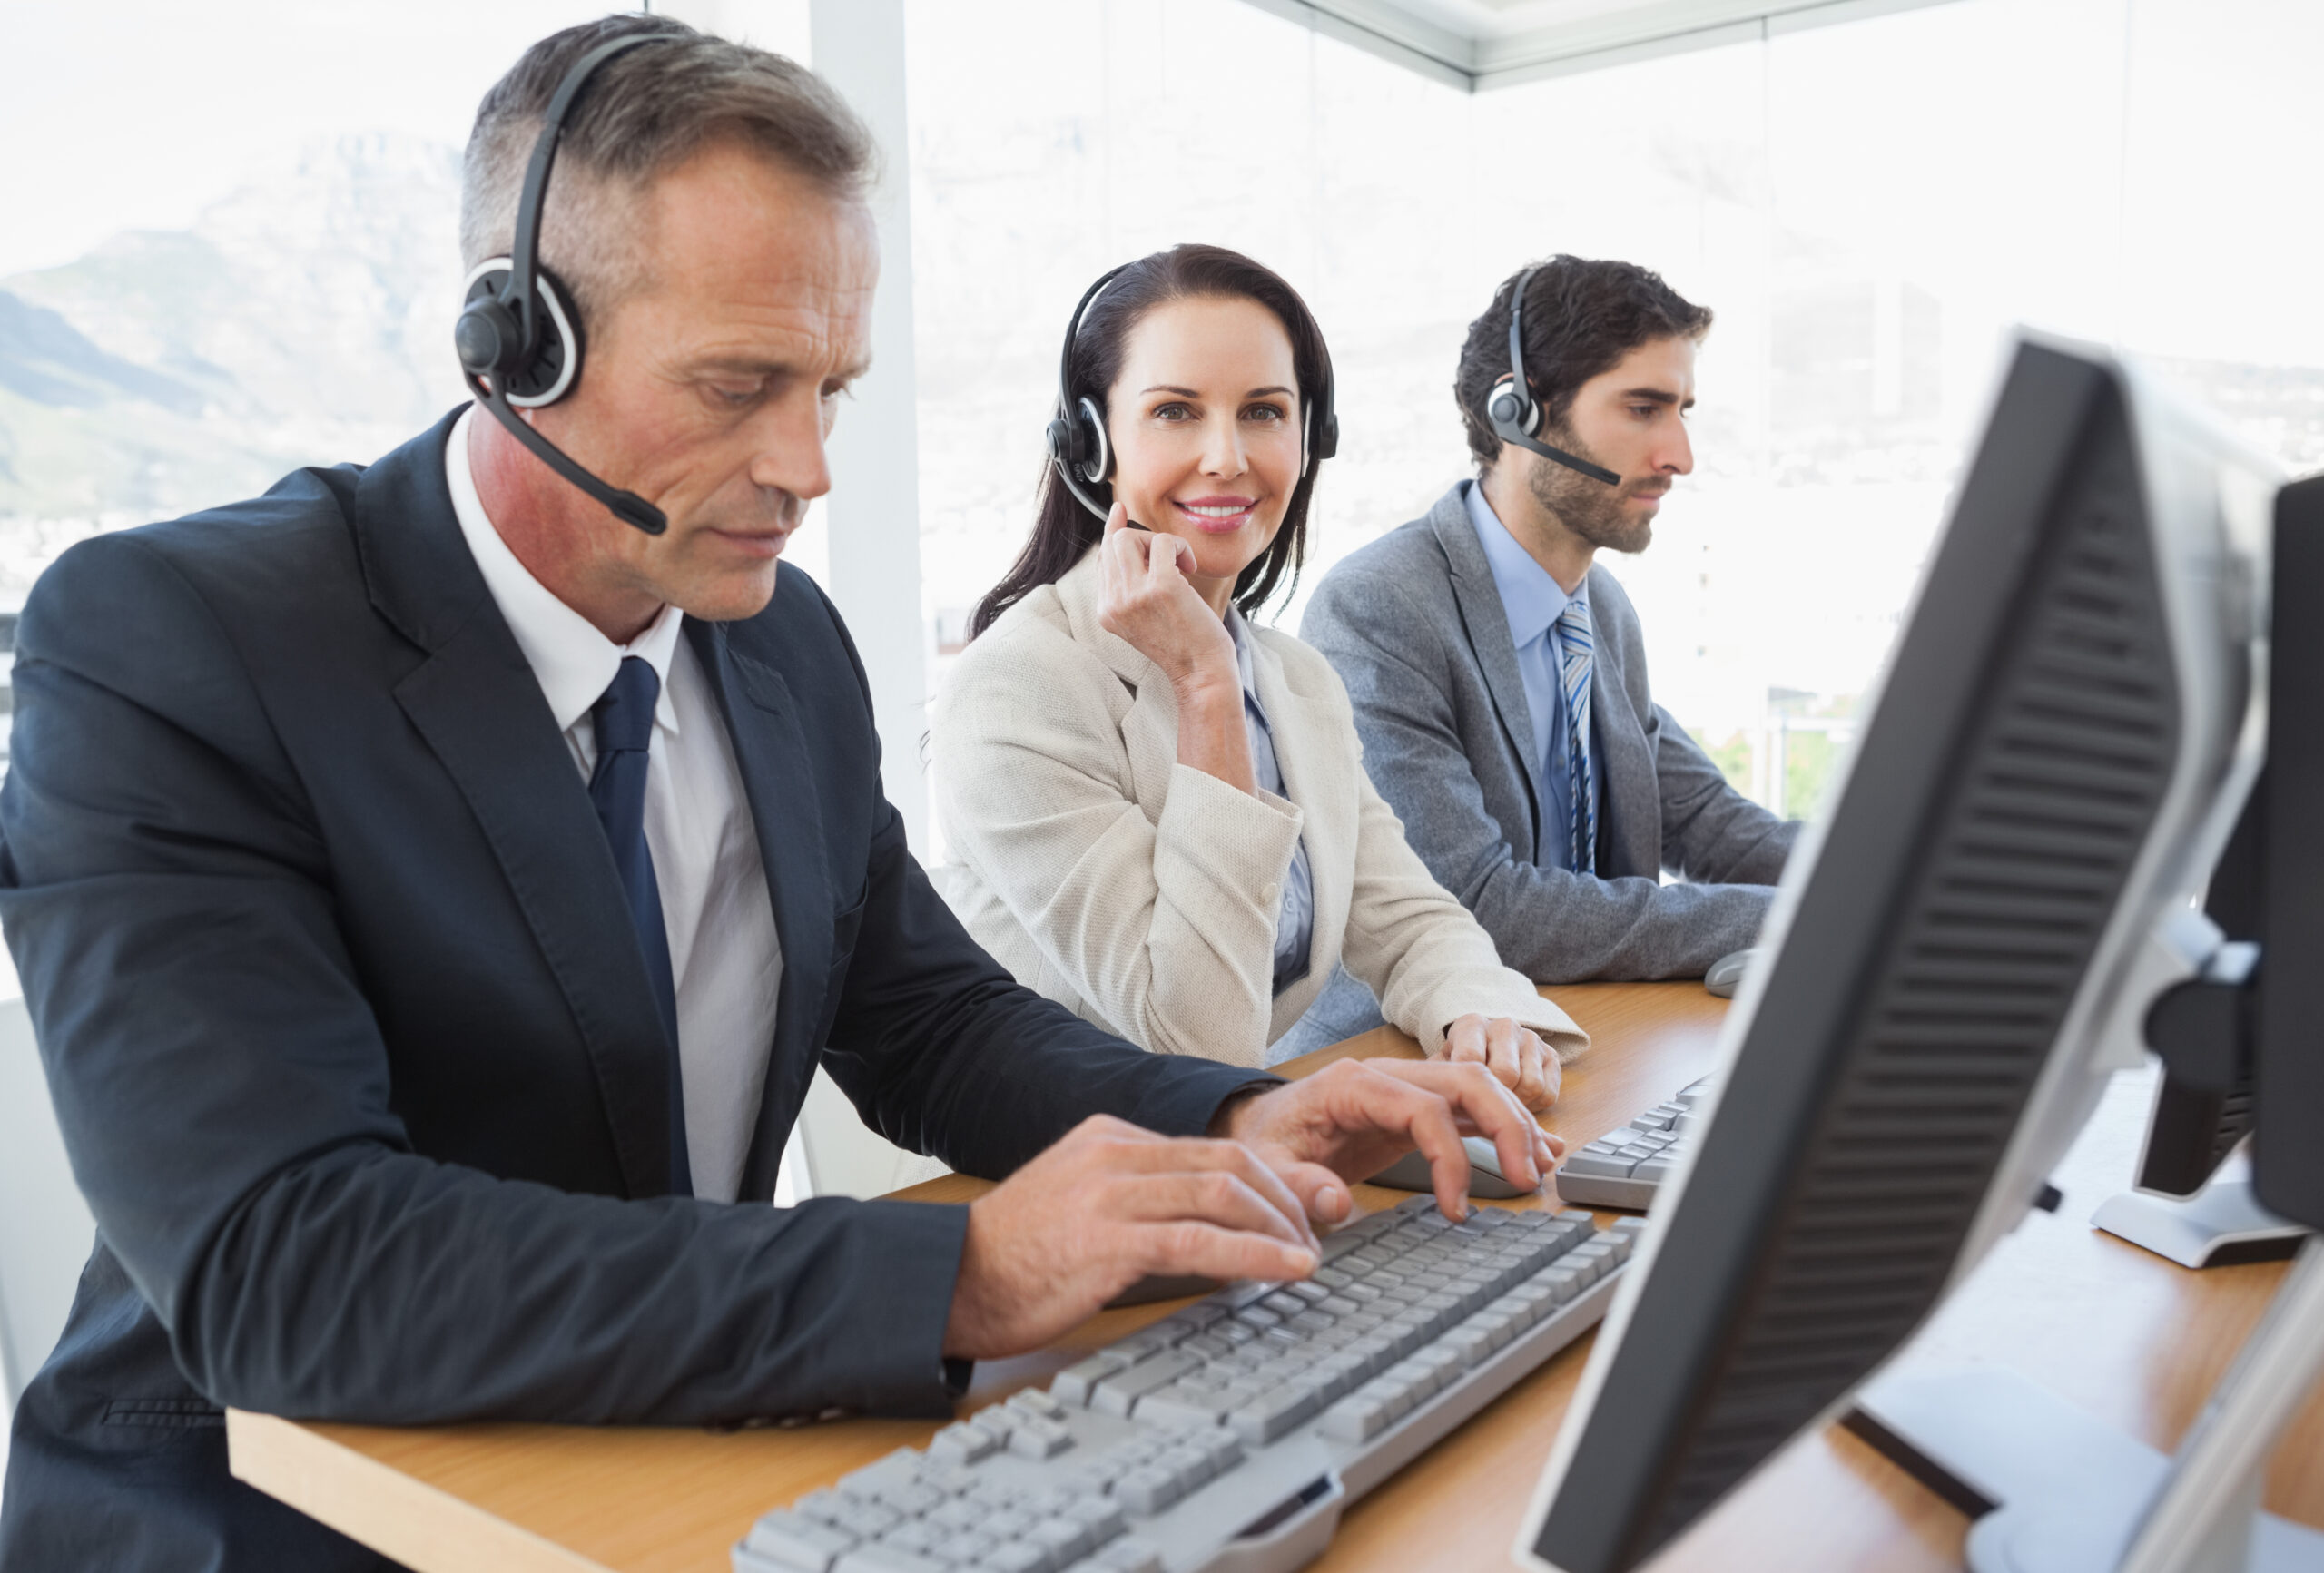 Smiling businesswoman working with teammates in the call center